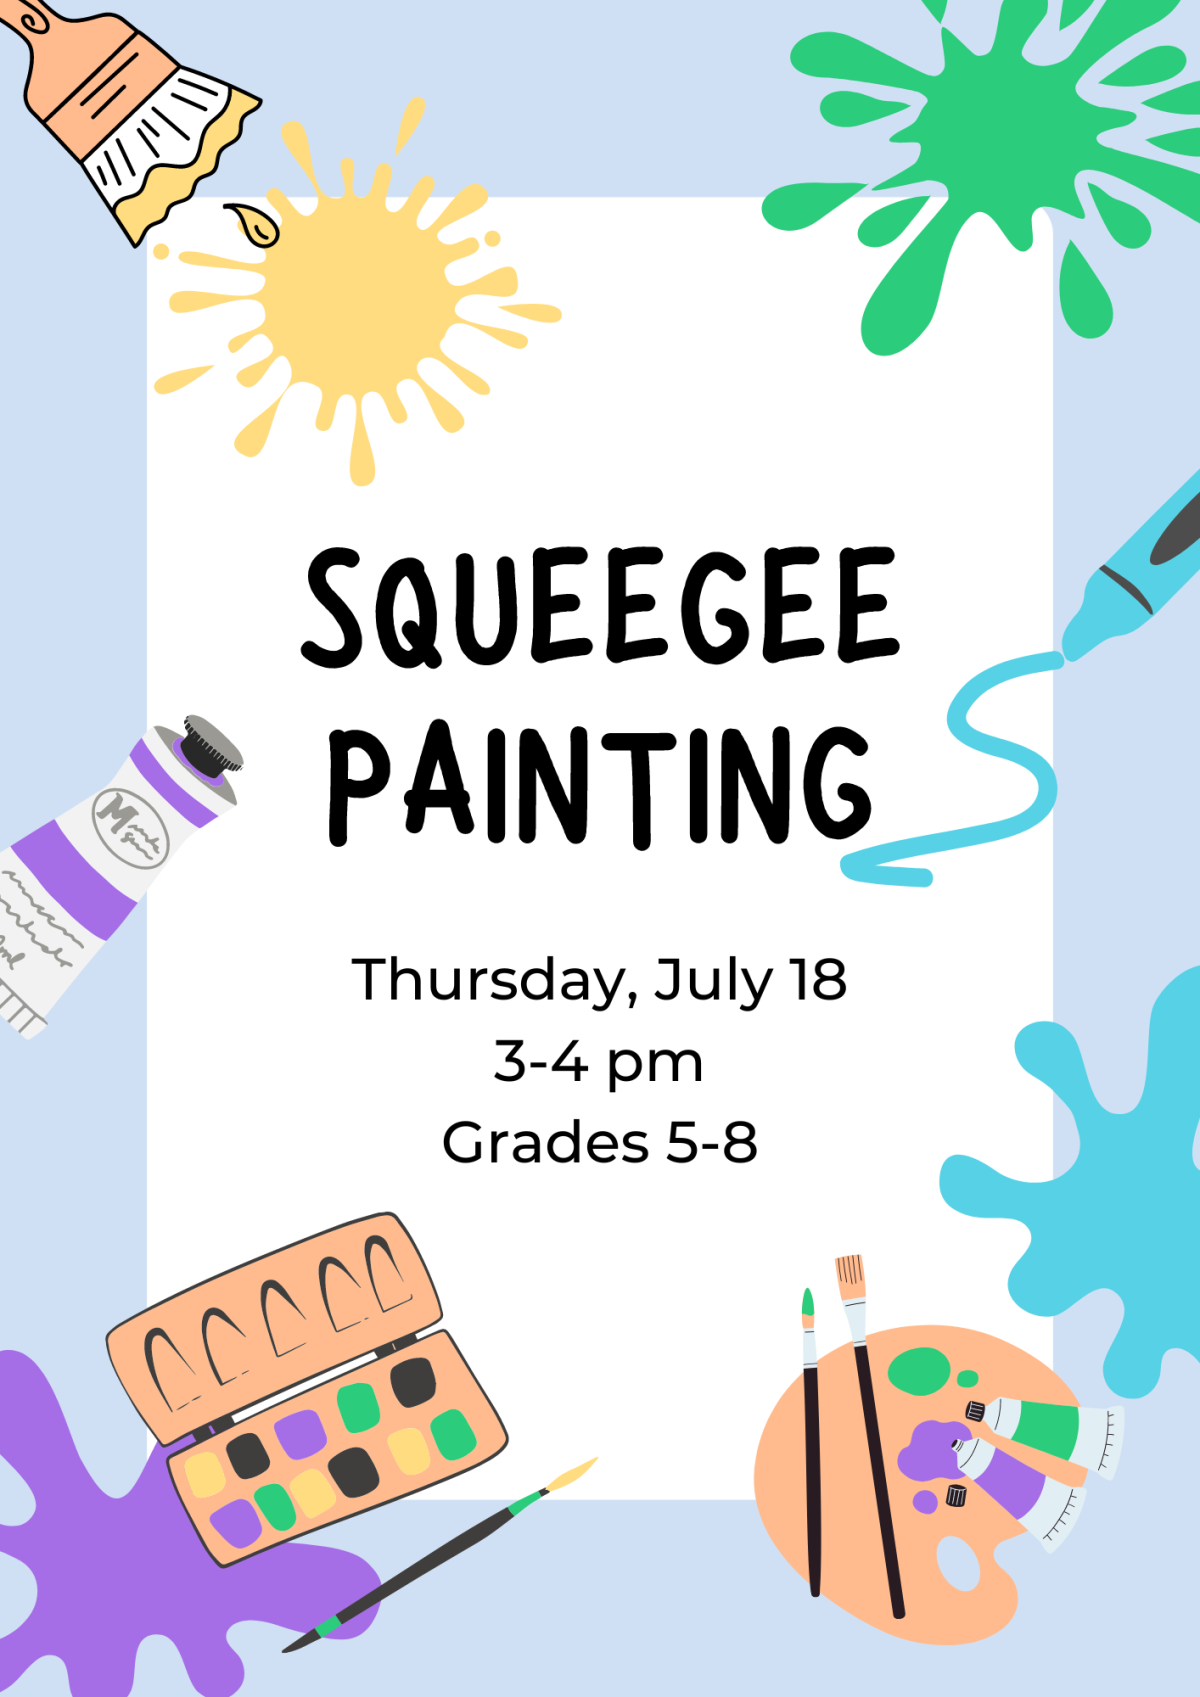 squeegee painting, painting, paint, art, craft. arts, crafts, prospect heights, prospect heights library, library, program